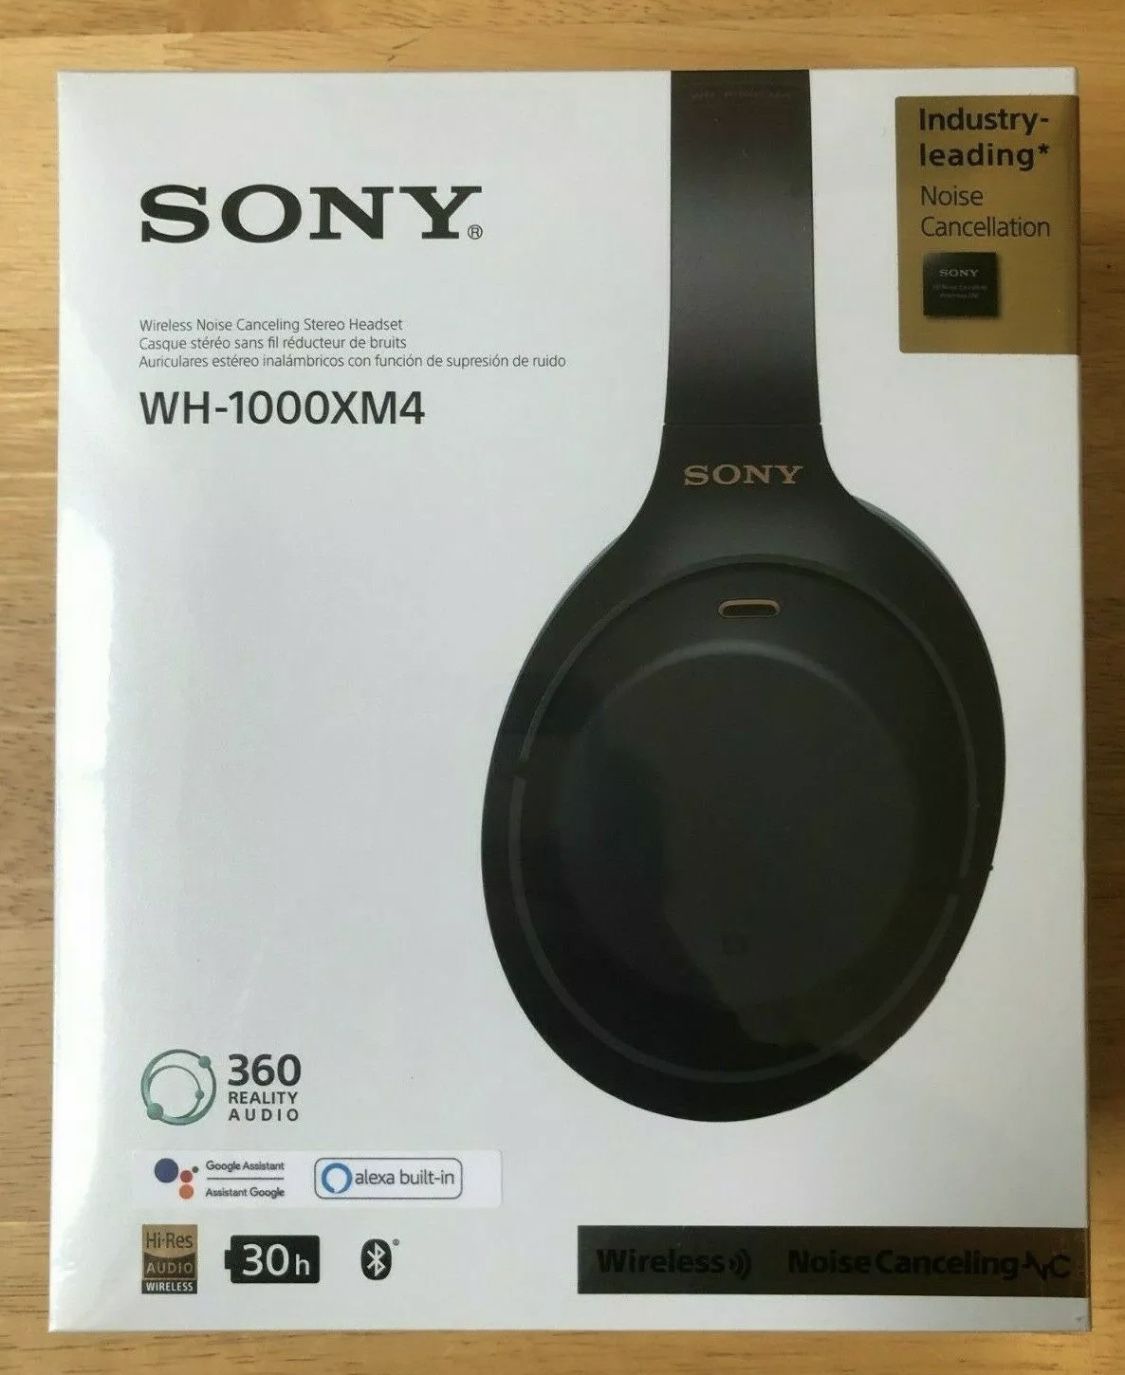 Sony WH-1000XM4 NEW Over the Ear Noise Cancelling Wireless Headphones - Black - New